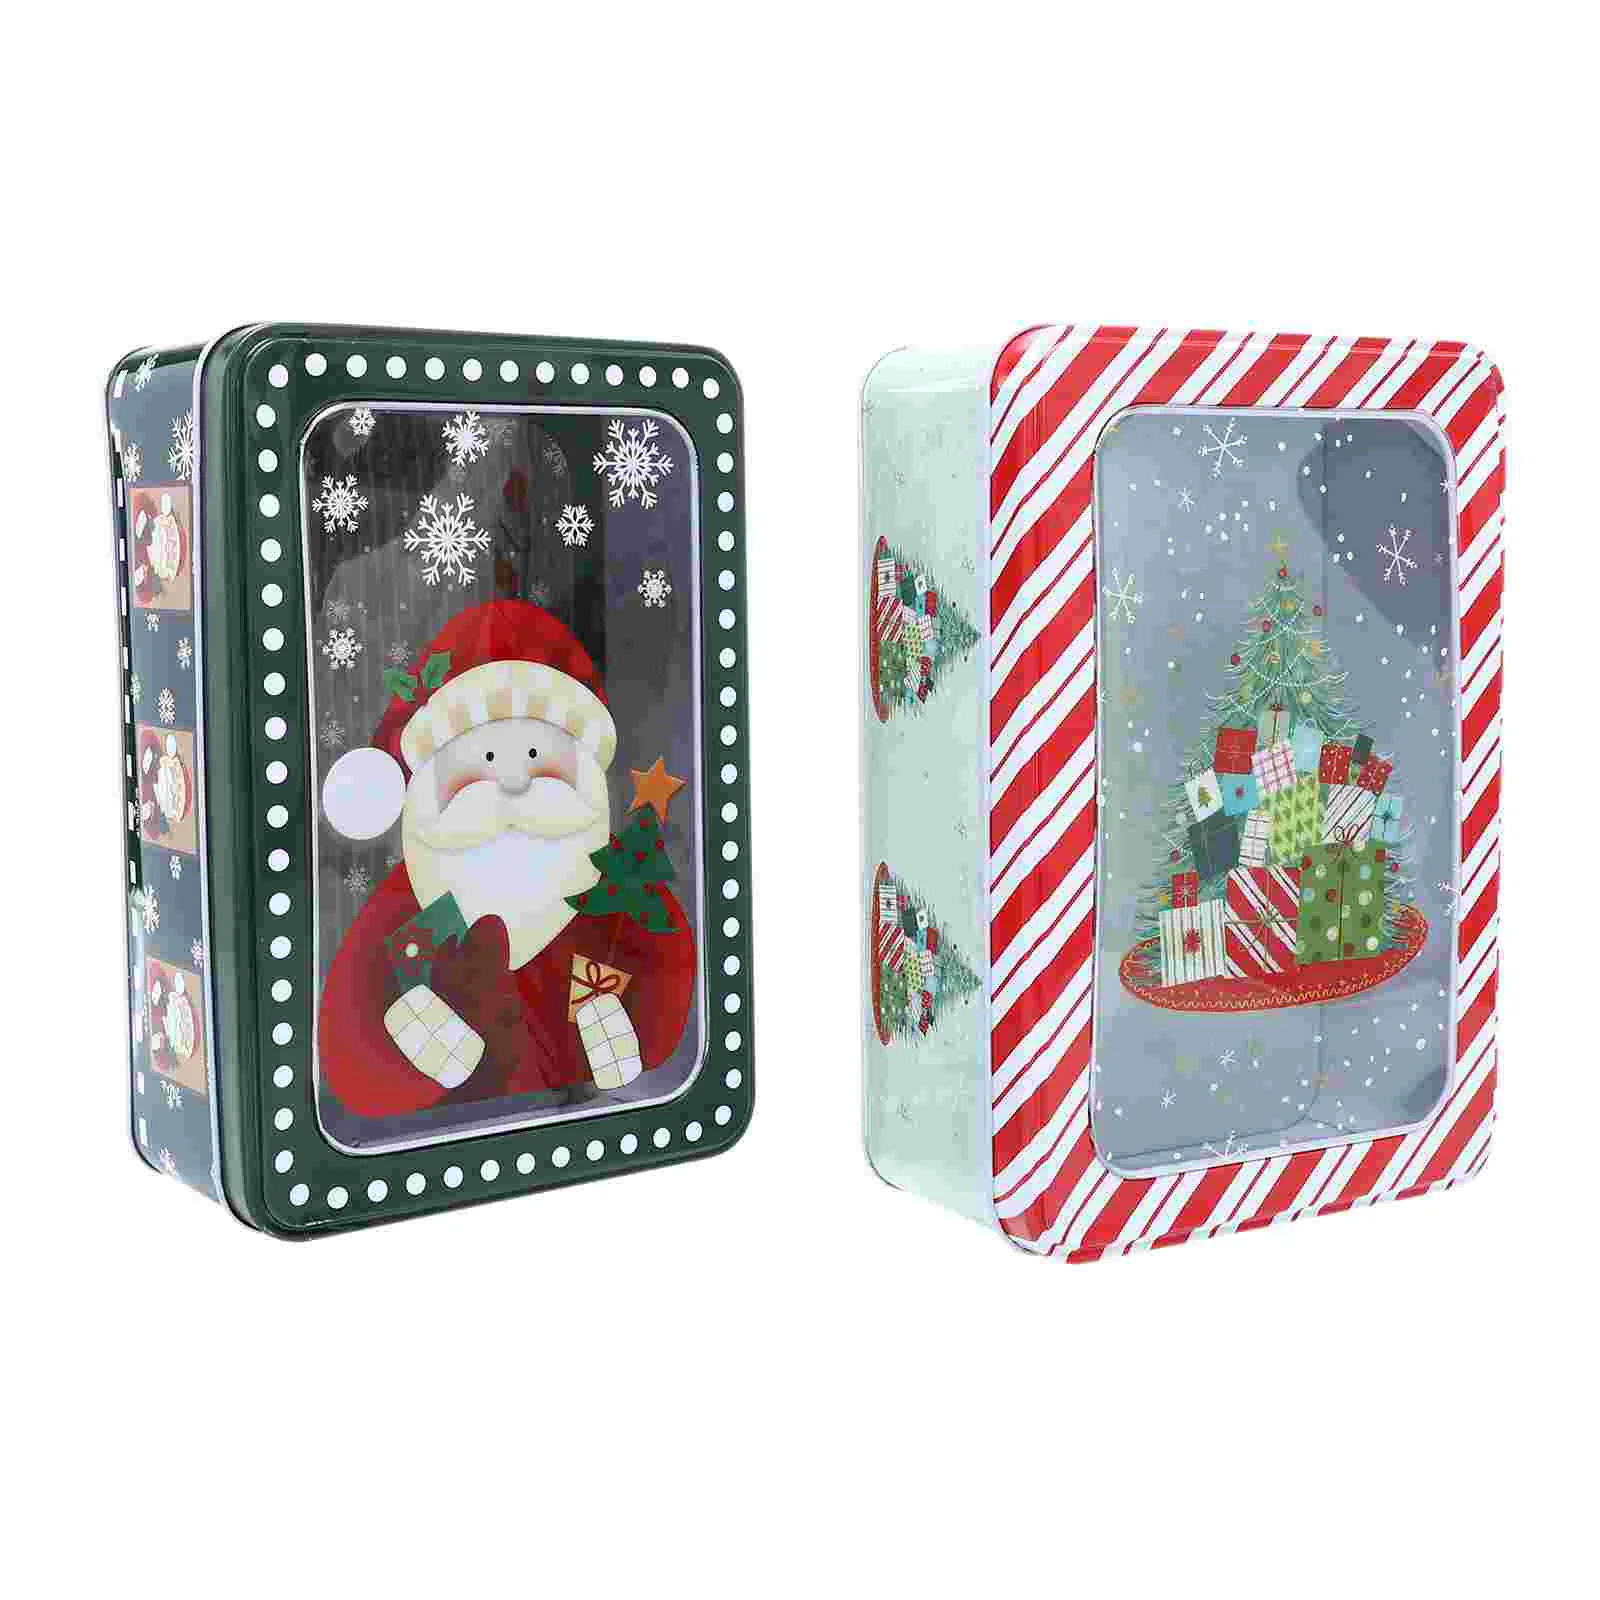 

2 Pcs Christmas Tin Box Containers Storage Jar Sugar Case Tinplate Candy Party Favors Holder Iron